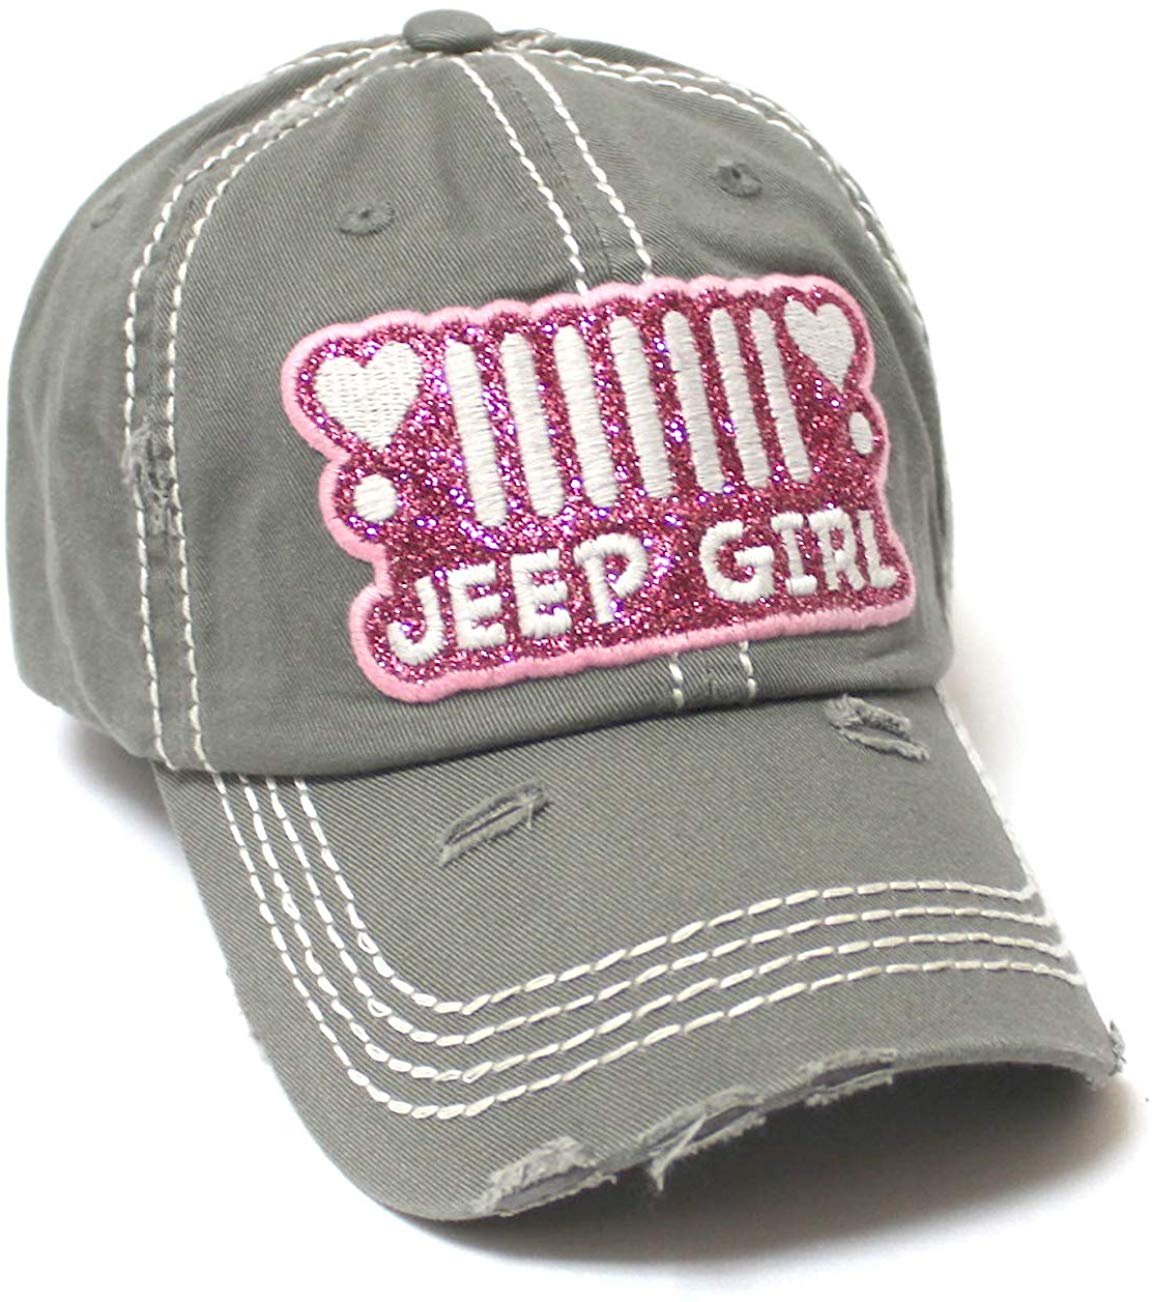 Women's Ballcap Jeep Girl Pink Glitter, Hearts Patch Embroidery Hat, Silver Mist Grey - Caps 'N Vintage 